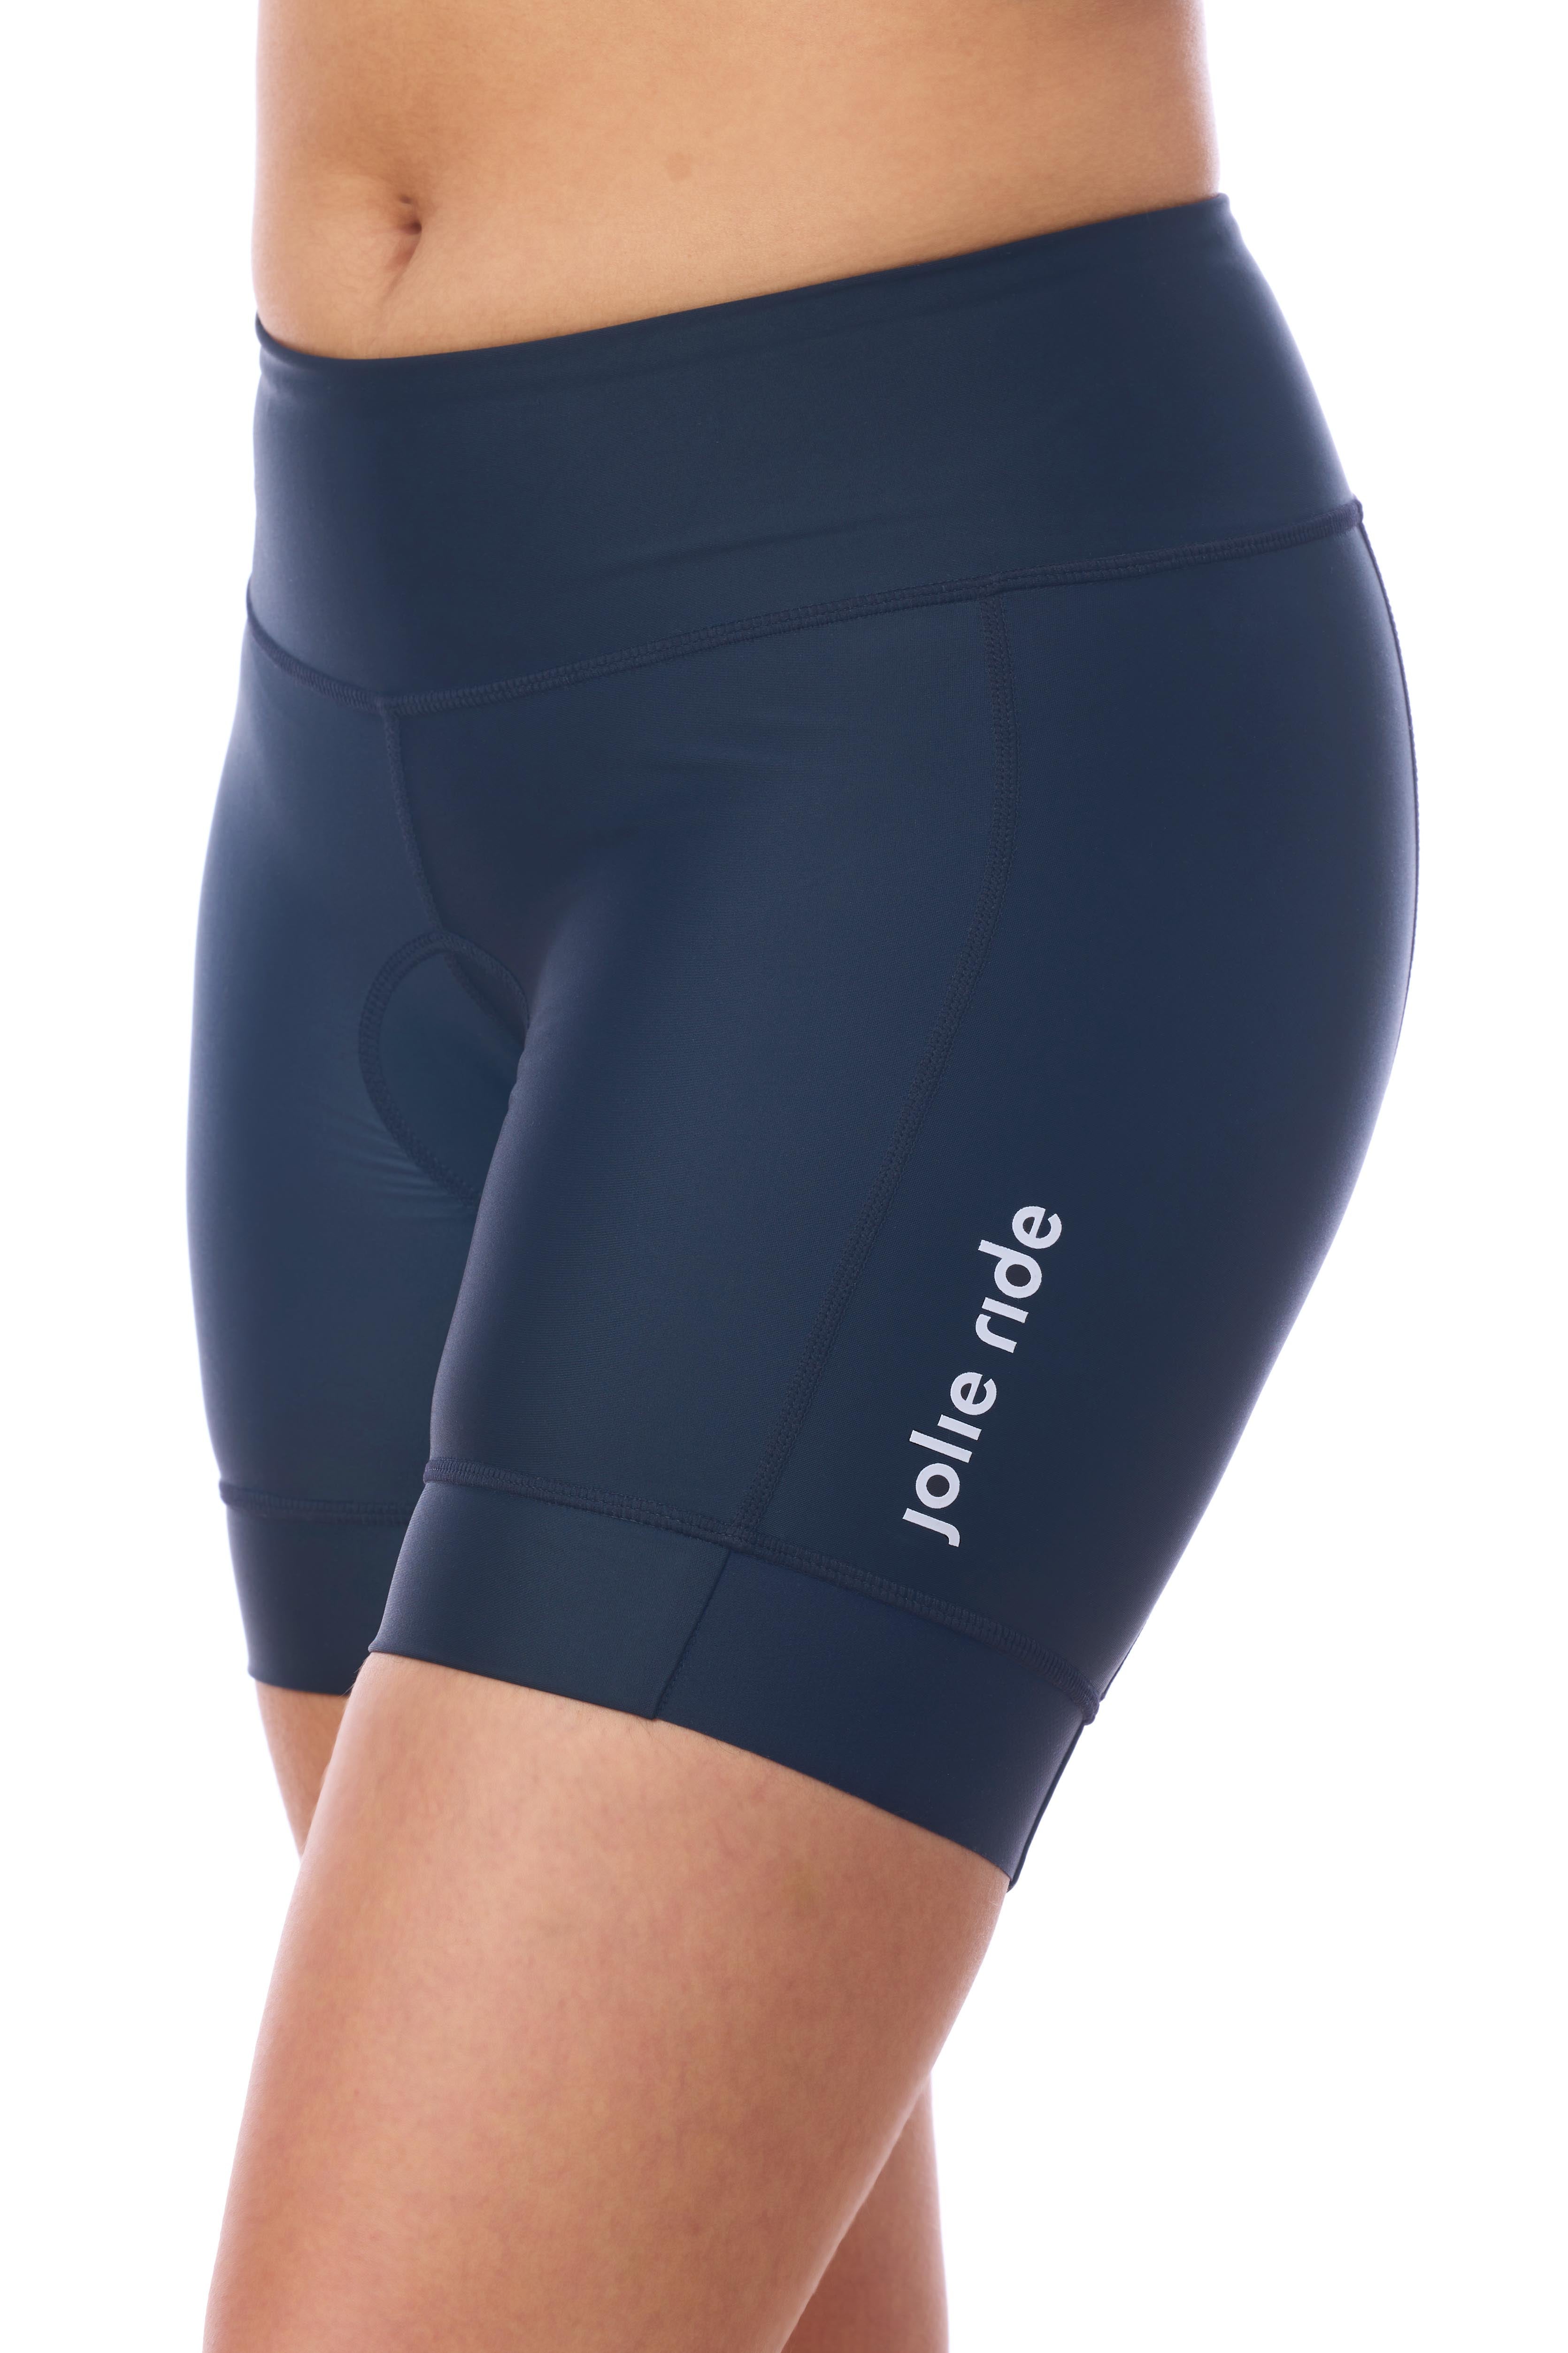 JolieRide Cycling shorts Navy / XS mid-thigh fit cycling shorts with 5 1/2" Inseam and UV protection